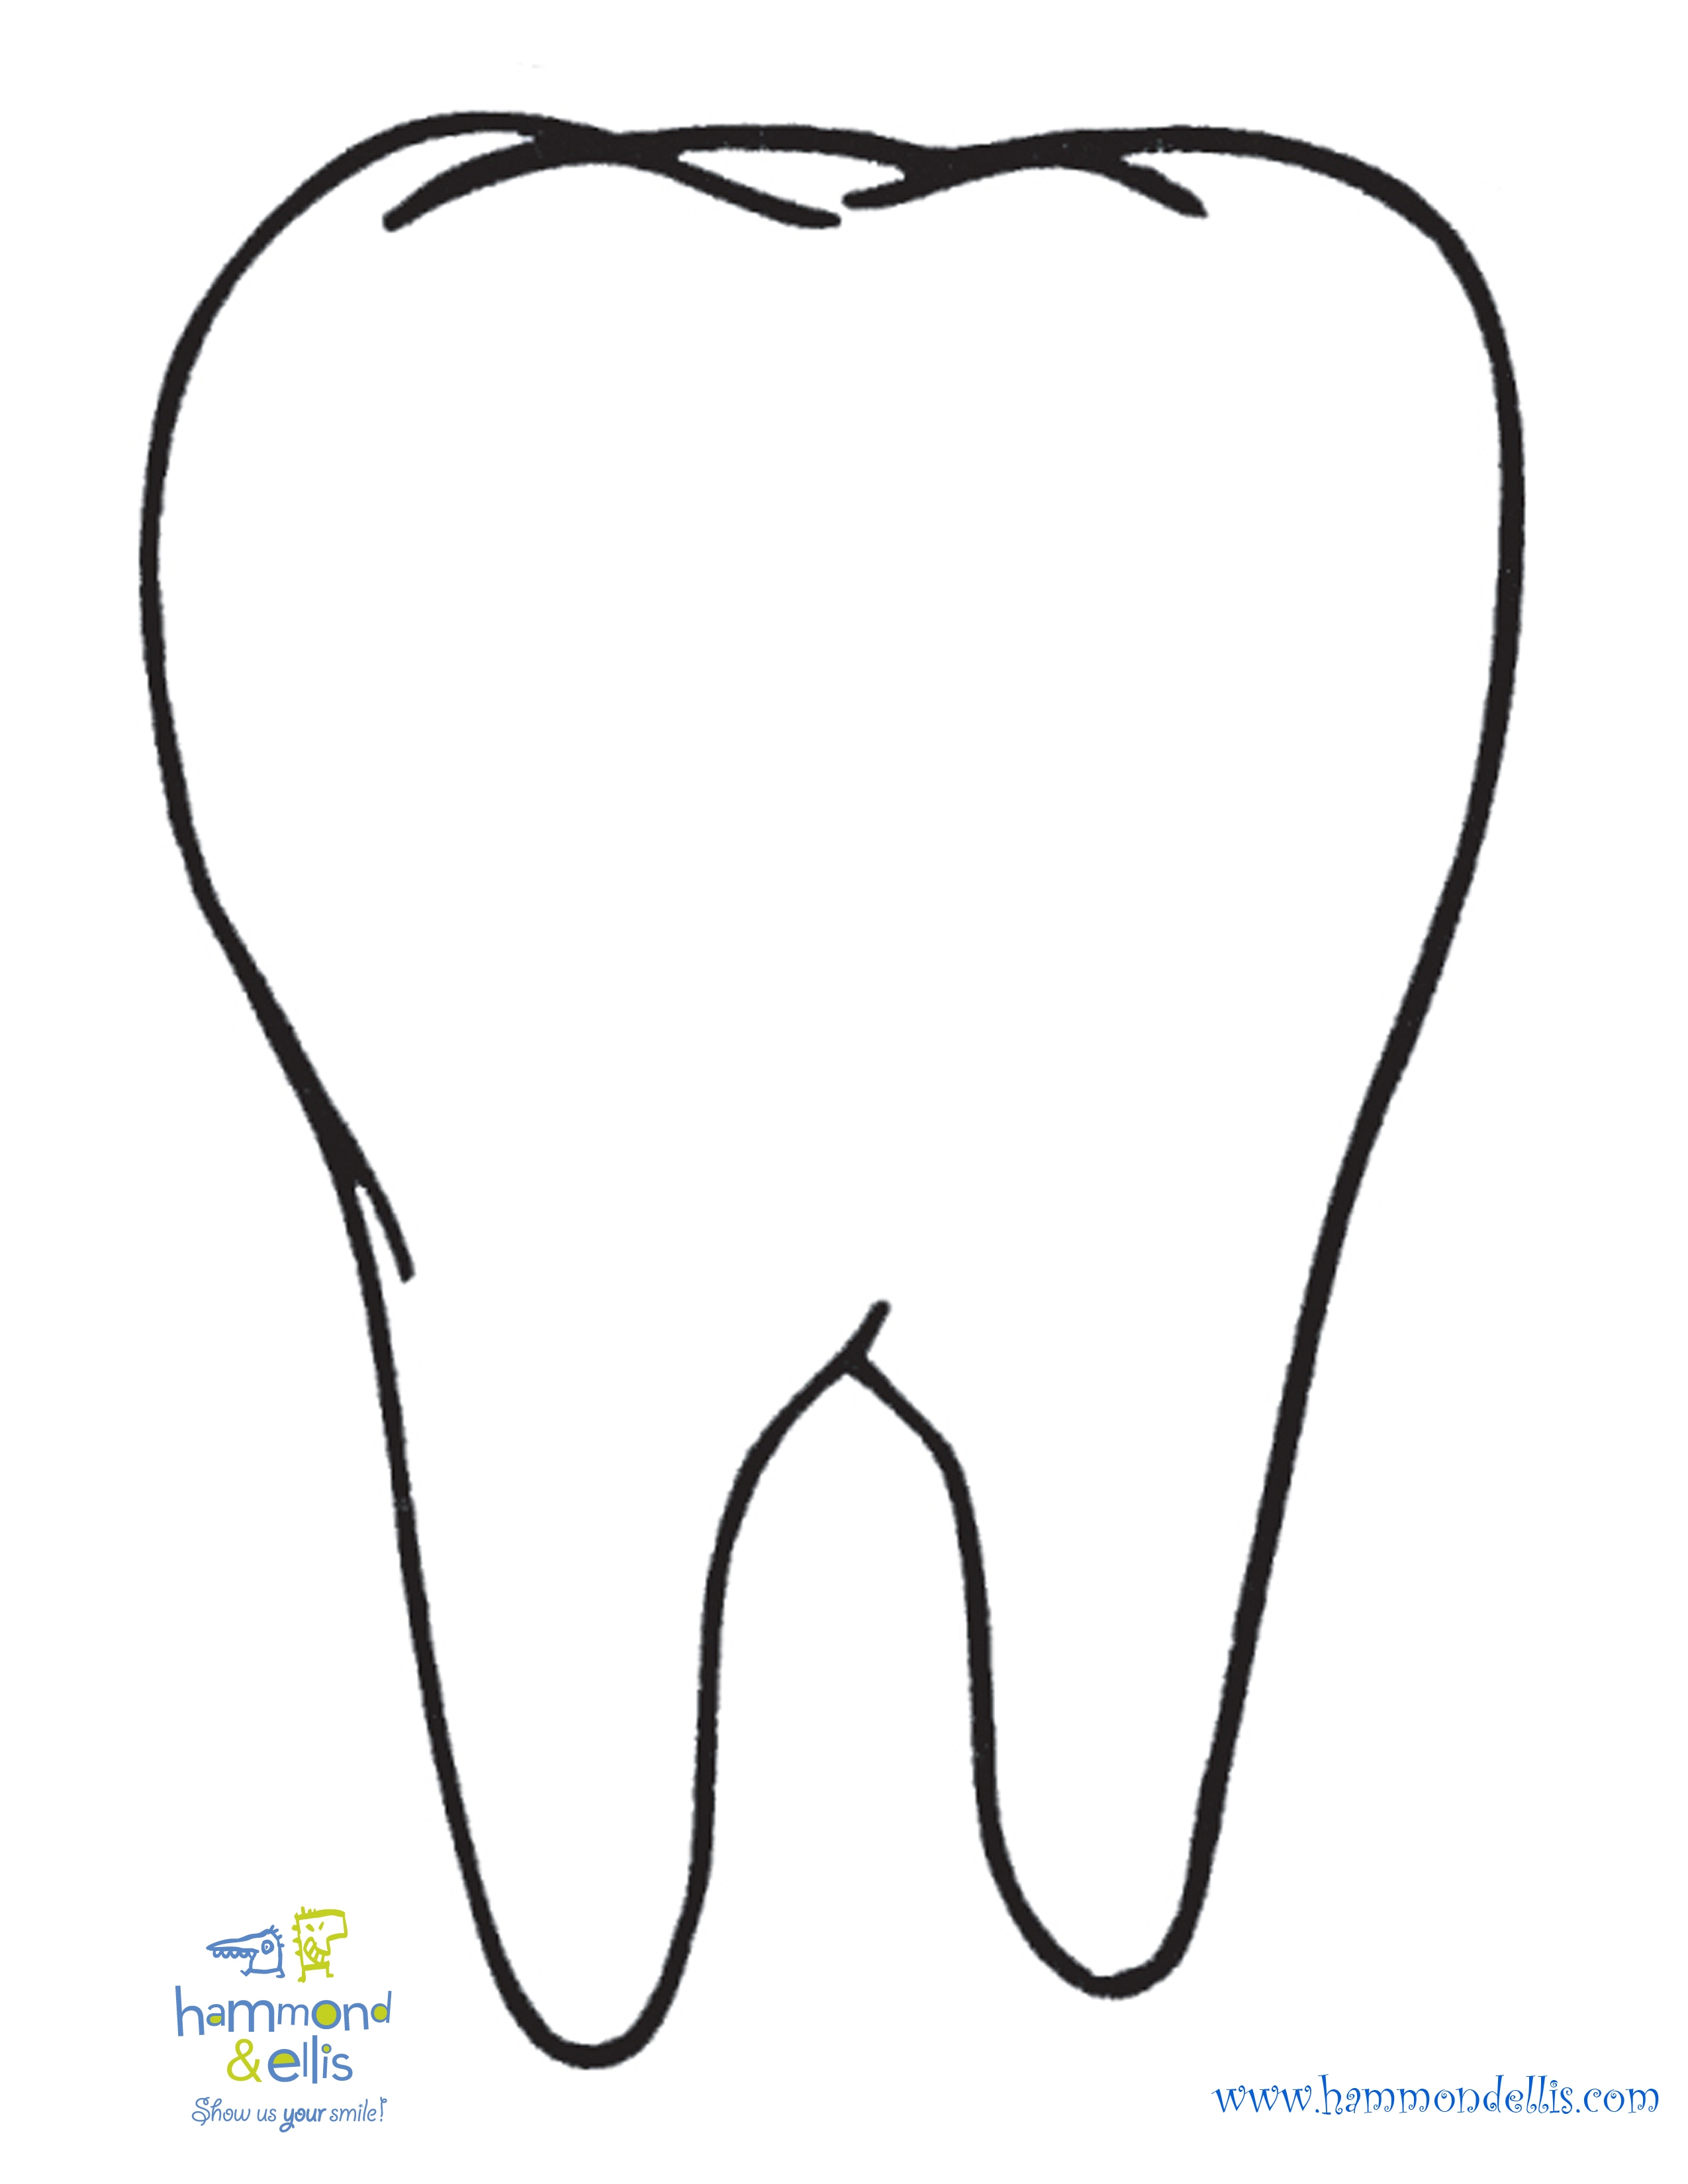 Tooth funny teeth cartoon picture images clip art clipartwiz